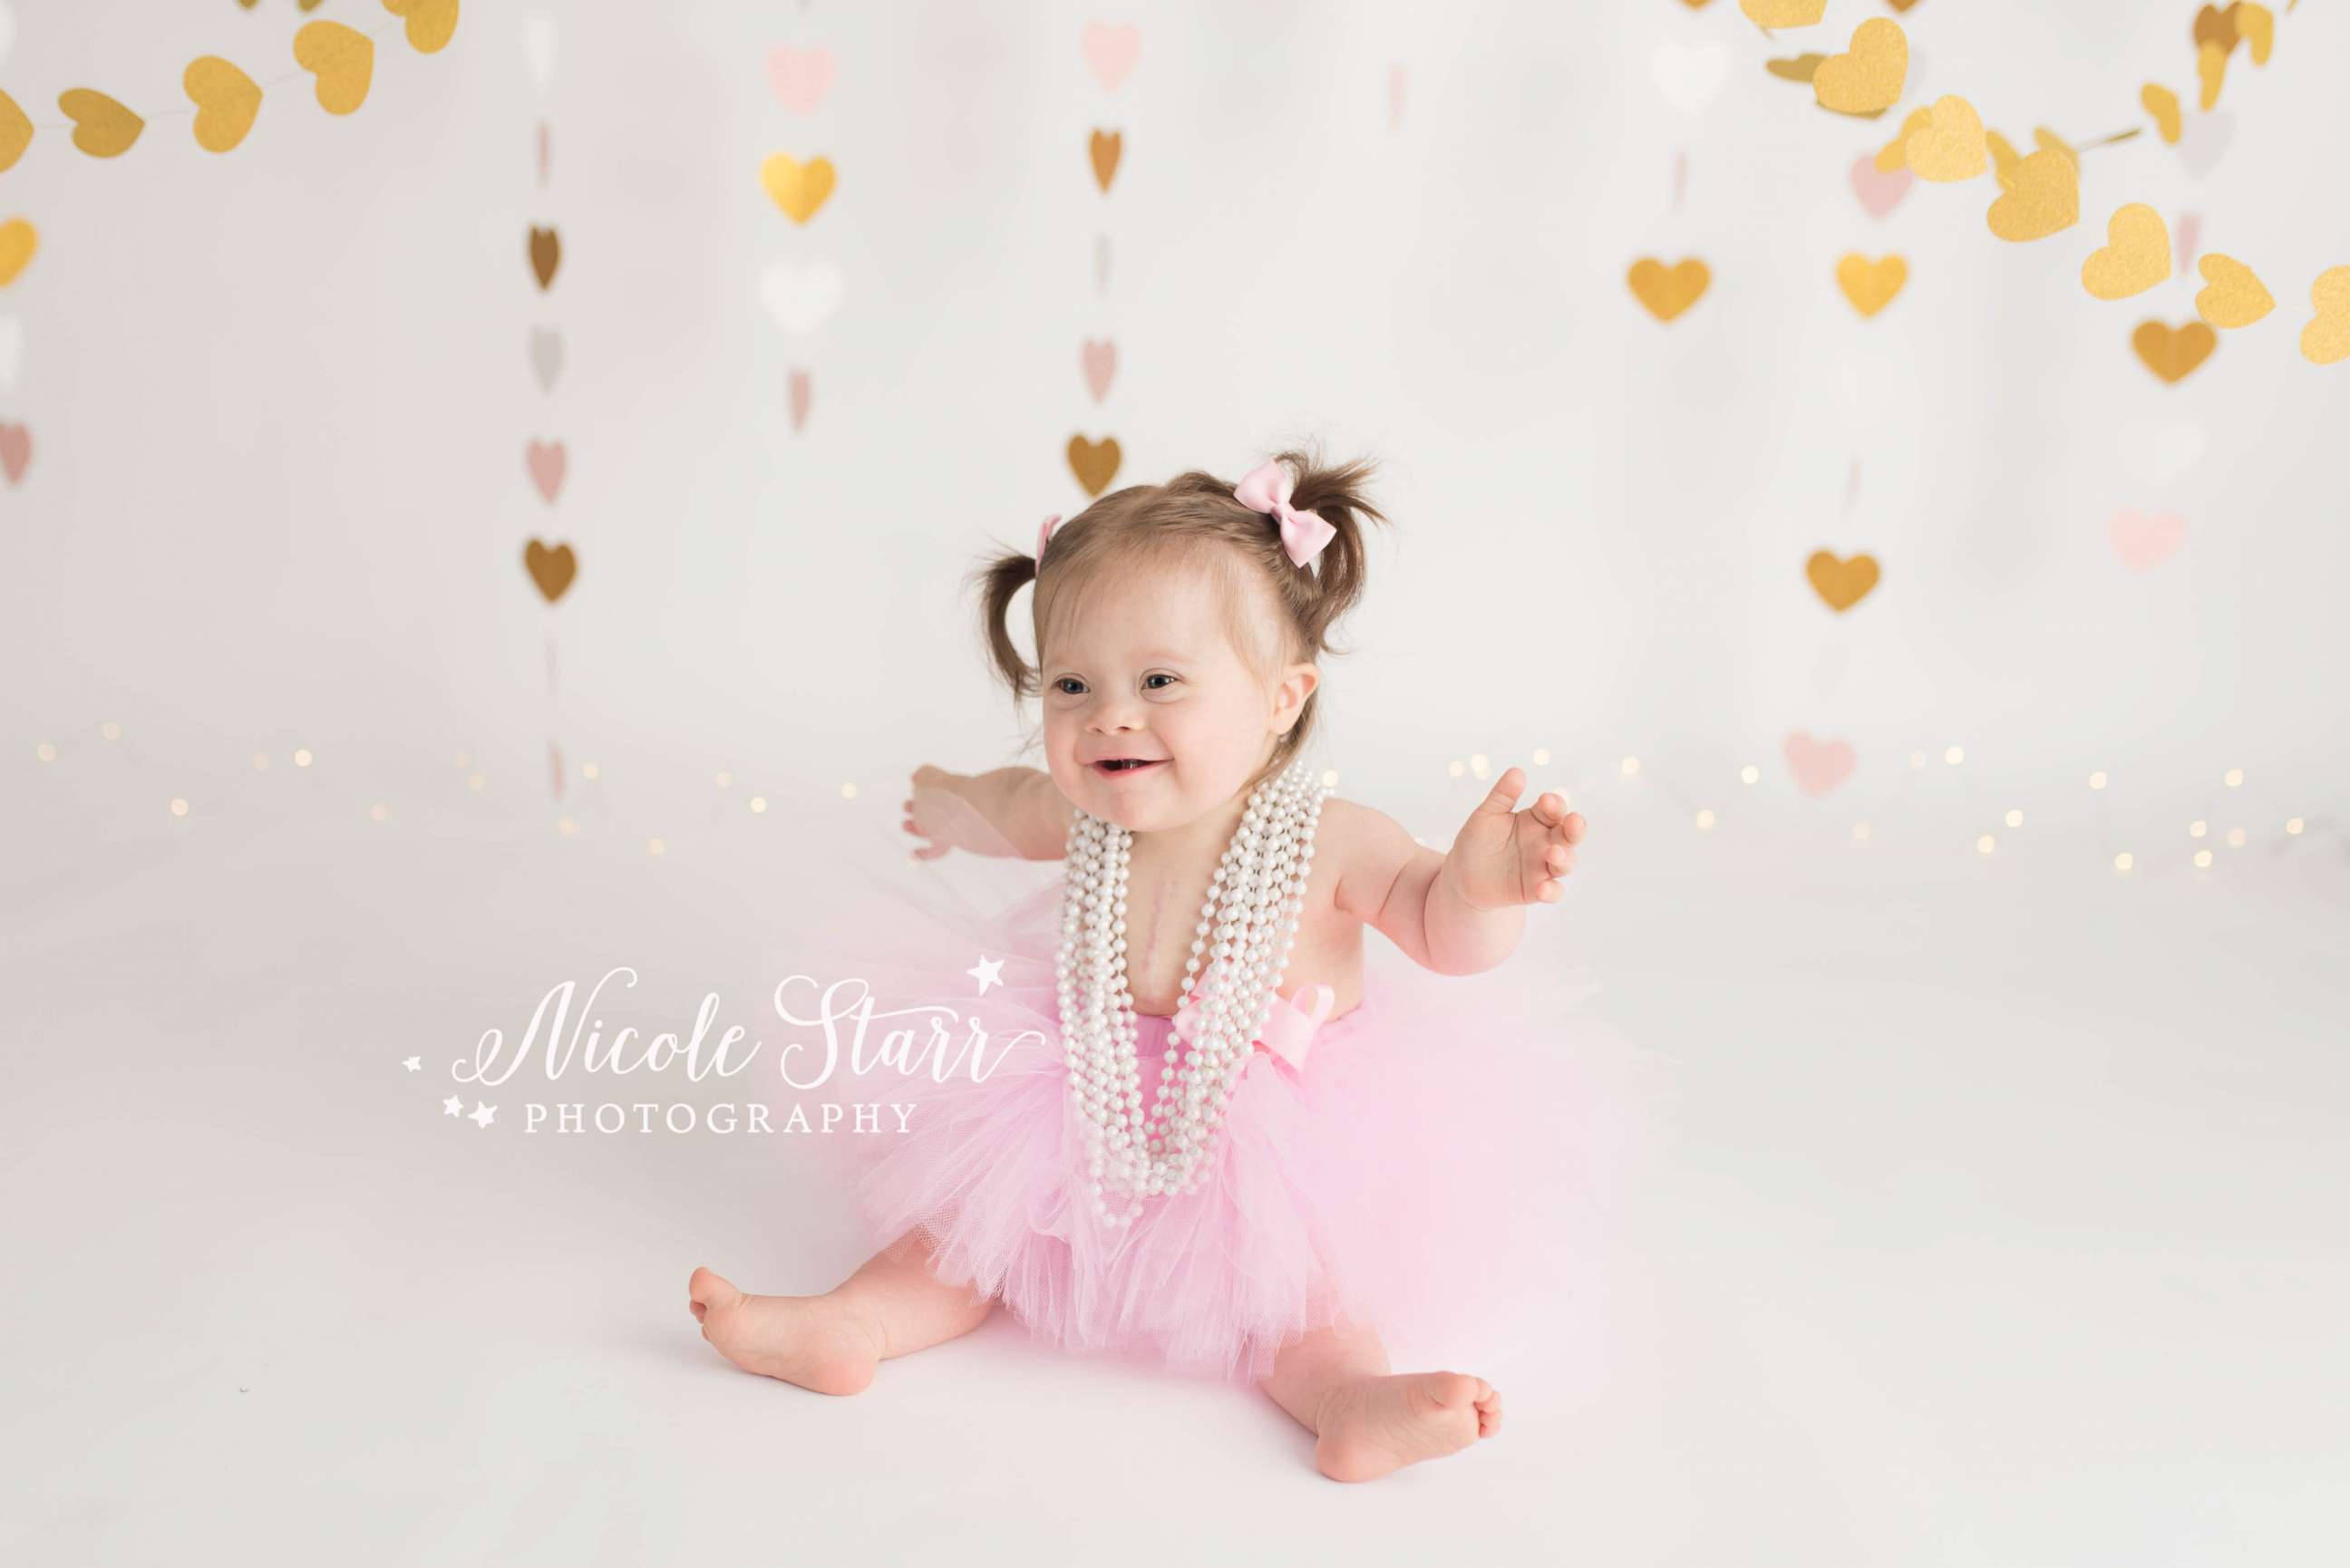 PHOTO: Babies' Three of Hearts photo shoot celebrates Down syndrome and life after heart surgery.